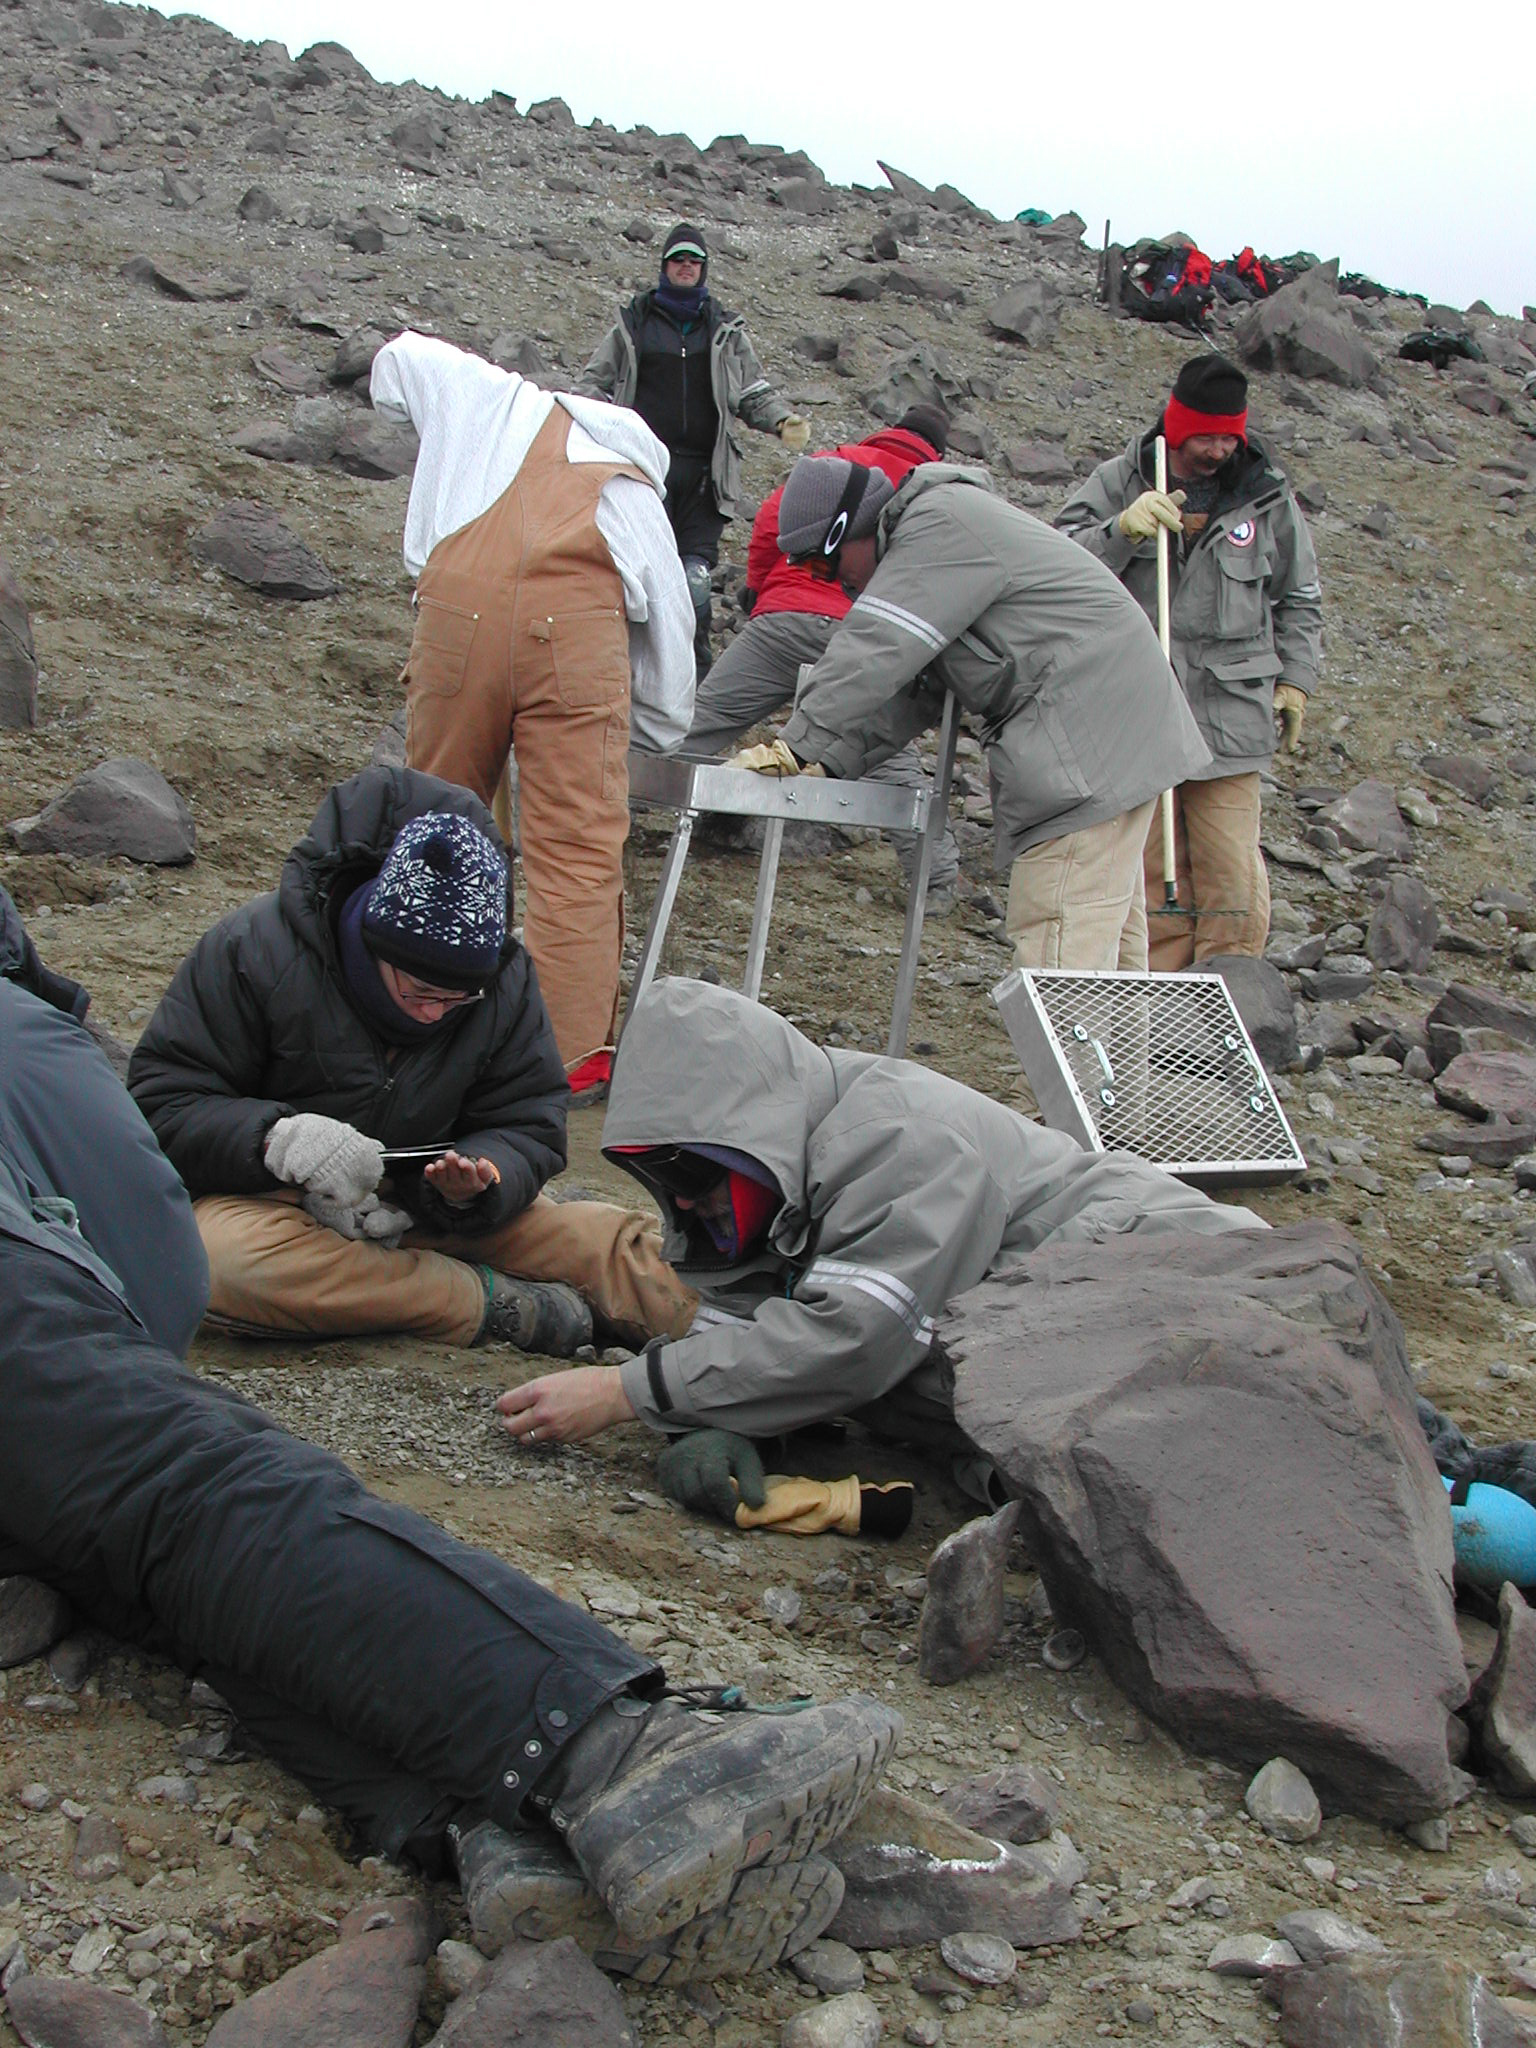 People examining rocks on a rocky slope.